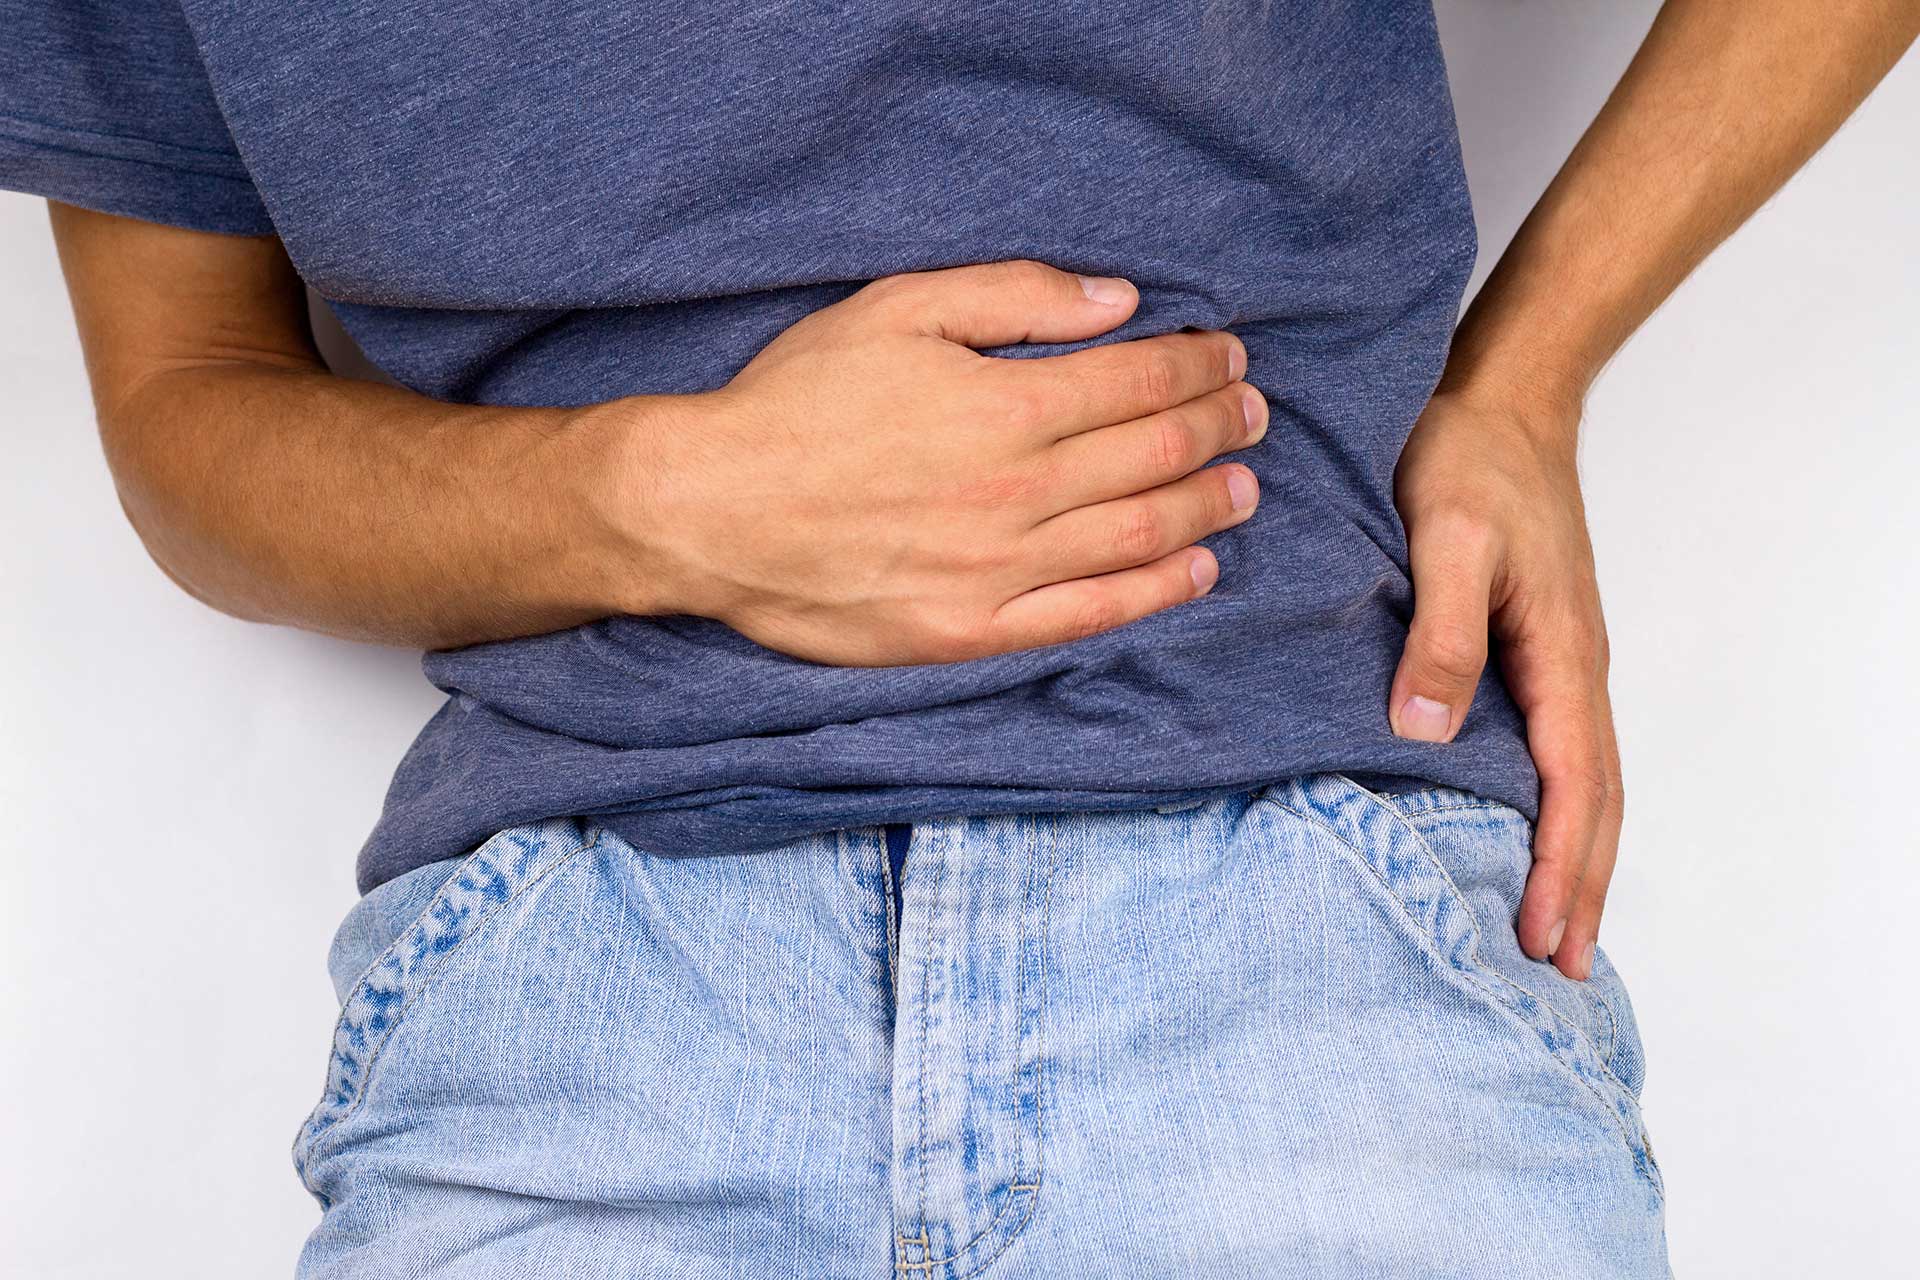 Top 5 Causes of Chronic Stomach Pain